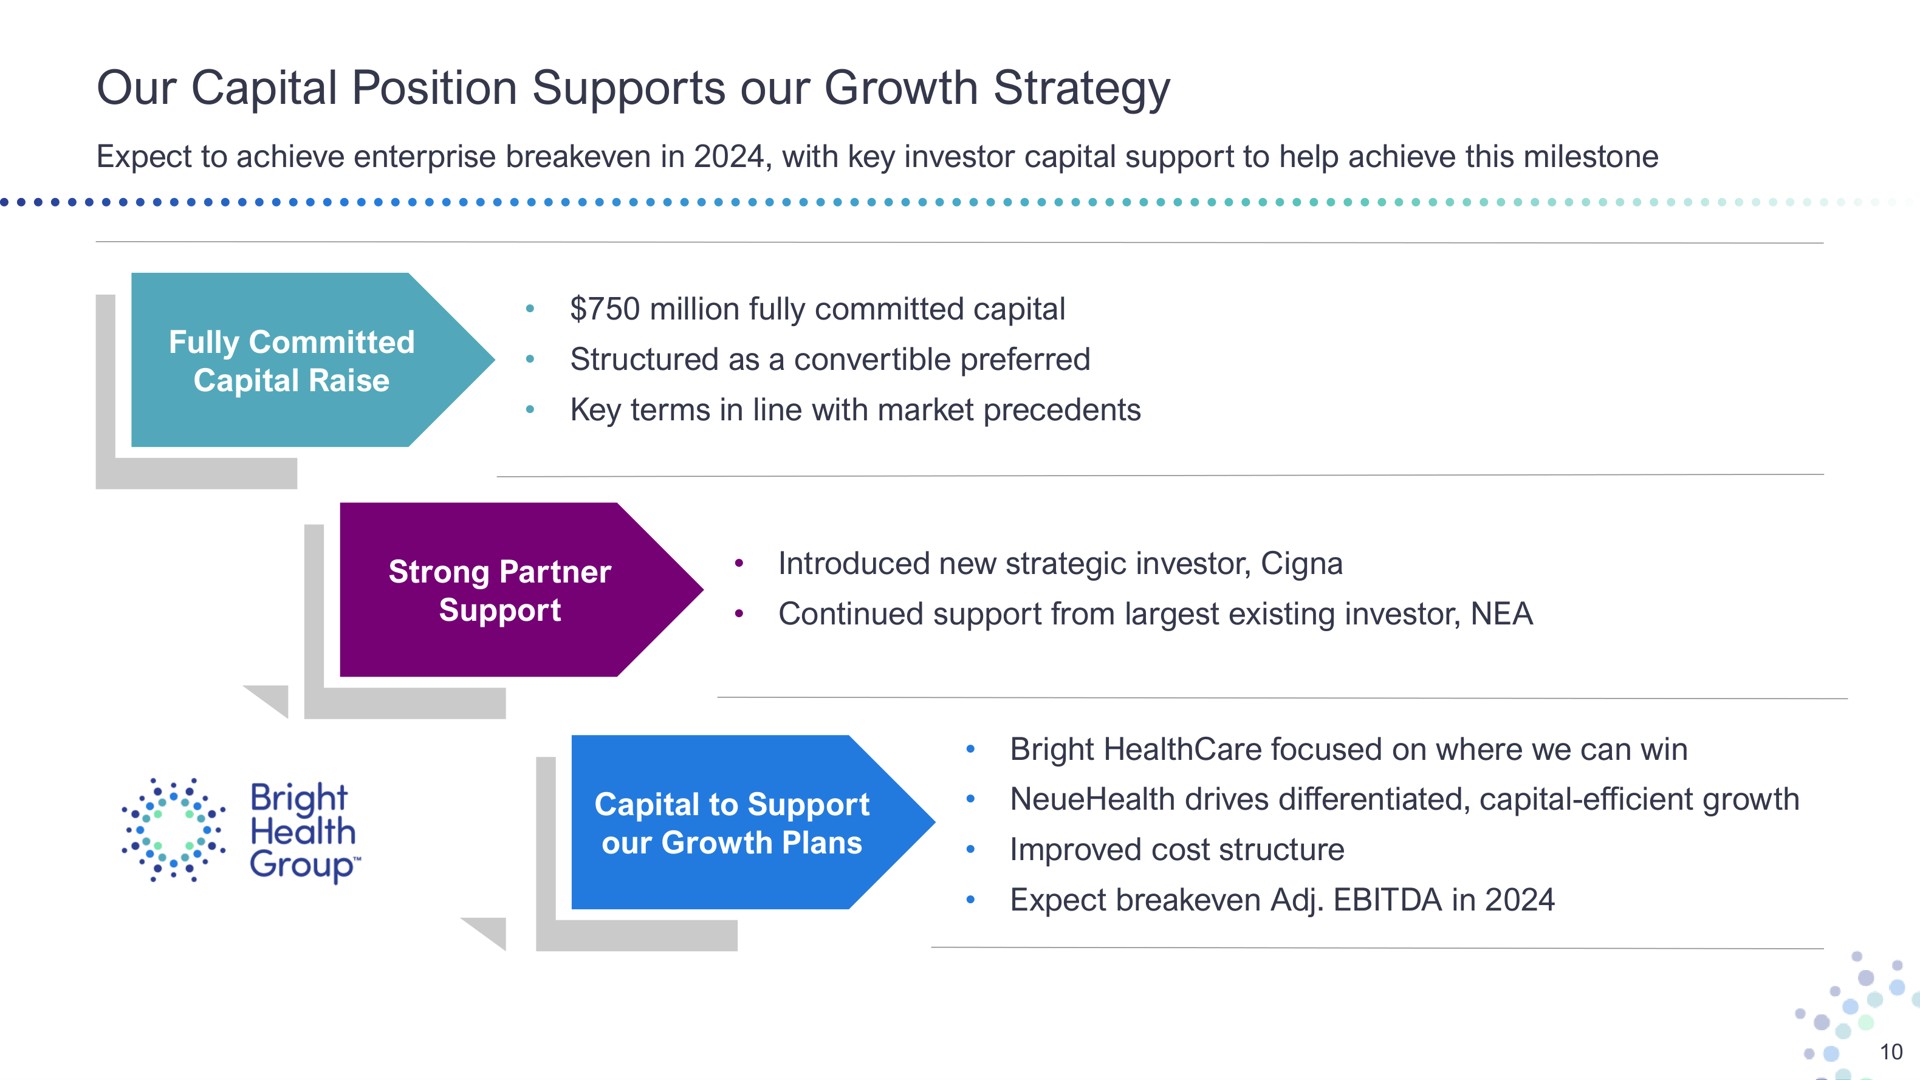 our capital position supports our growth strategy expect to achieve enterprise in with key investor support to help achieve this milestone fully committed million fully committed structured as a convertible preferred key terms in line with market precedents mortals support introduced new strategic investor continued support from existing investor nea ase group to support melee lat bright focused on where we can win drives differentiated capital efficient improved cost structure expect in | Bright Health Group